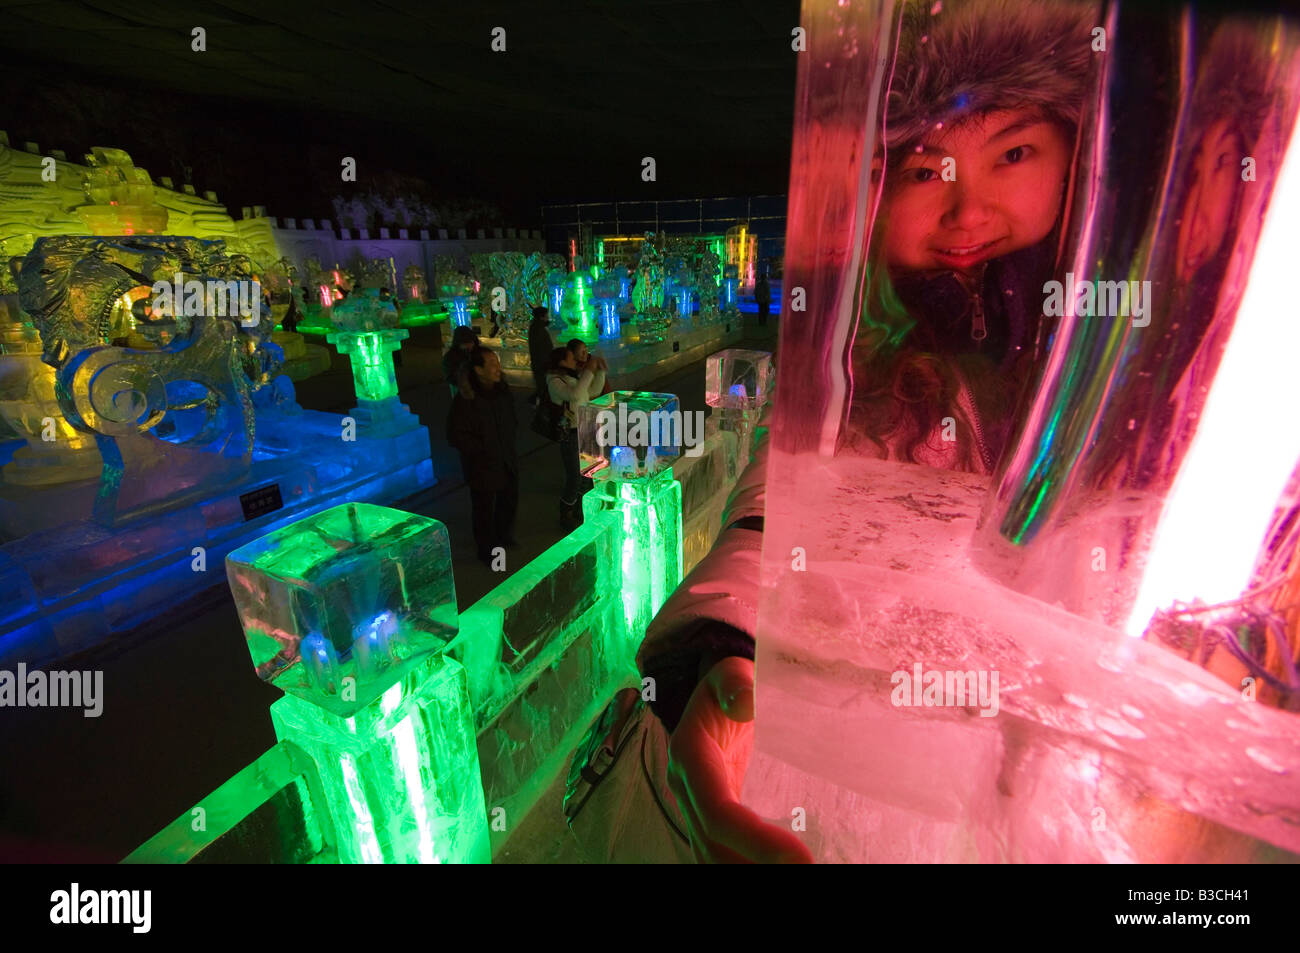 China, Beijing, Longqing Gorge Tourist Park. Ice sculpture festival - a girl's face looking through an ice sculpture Stock Photo